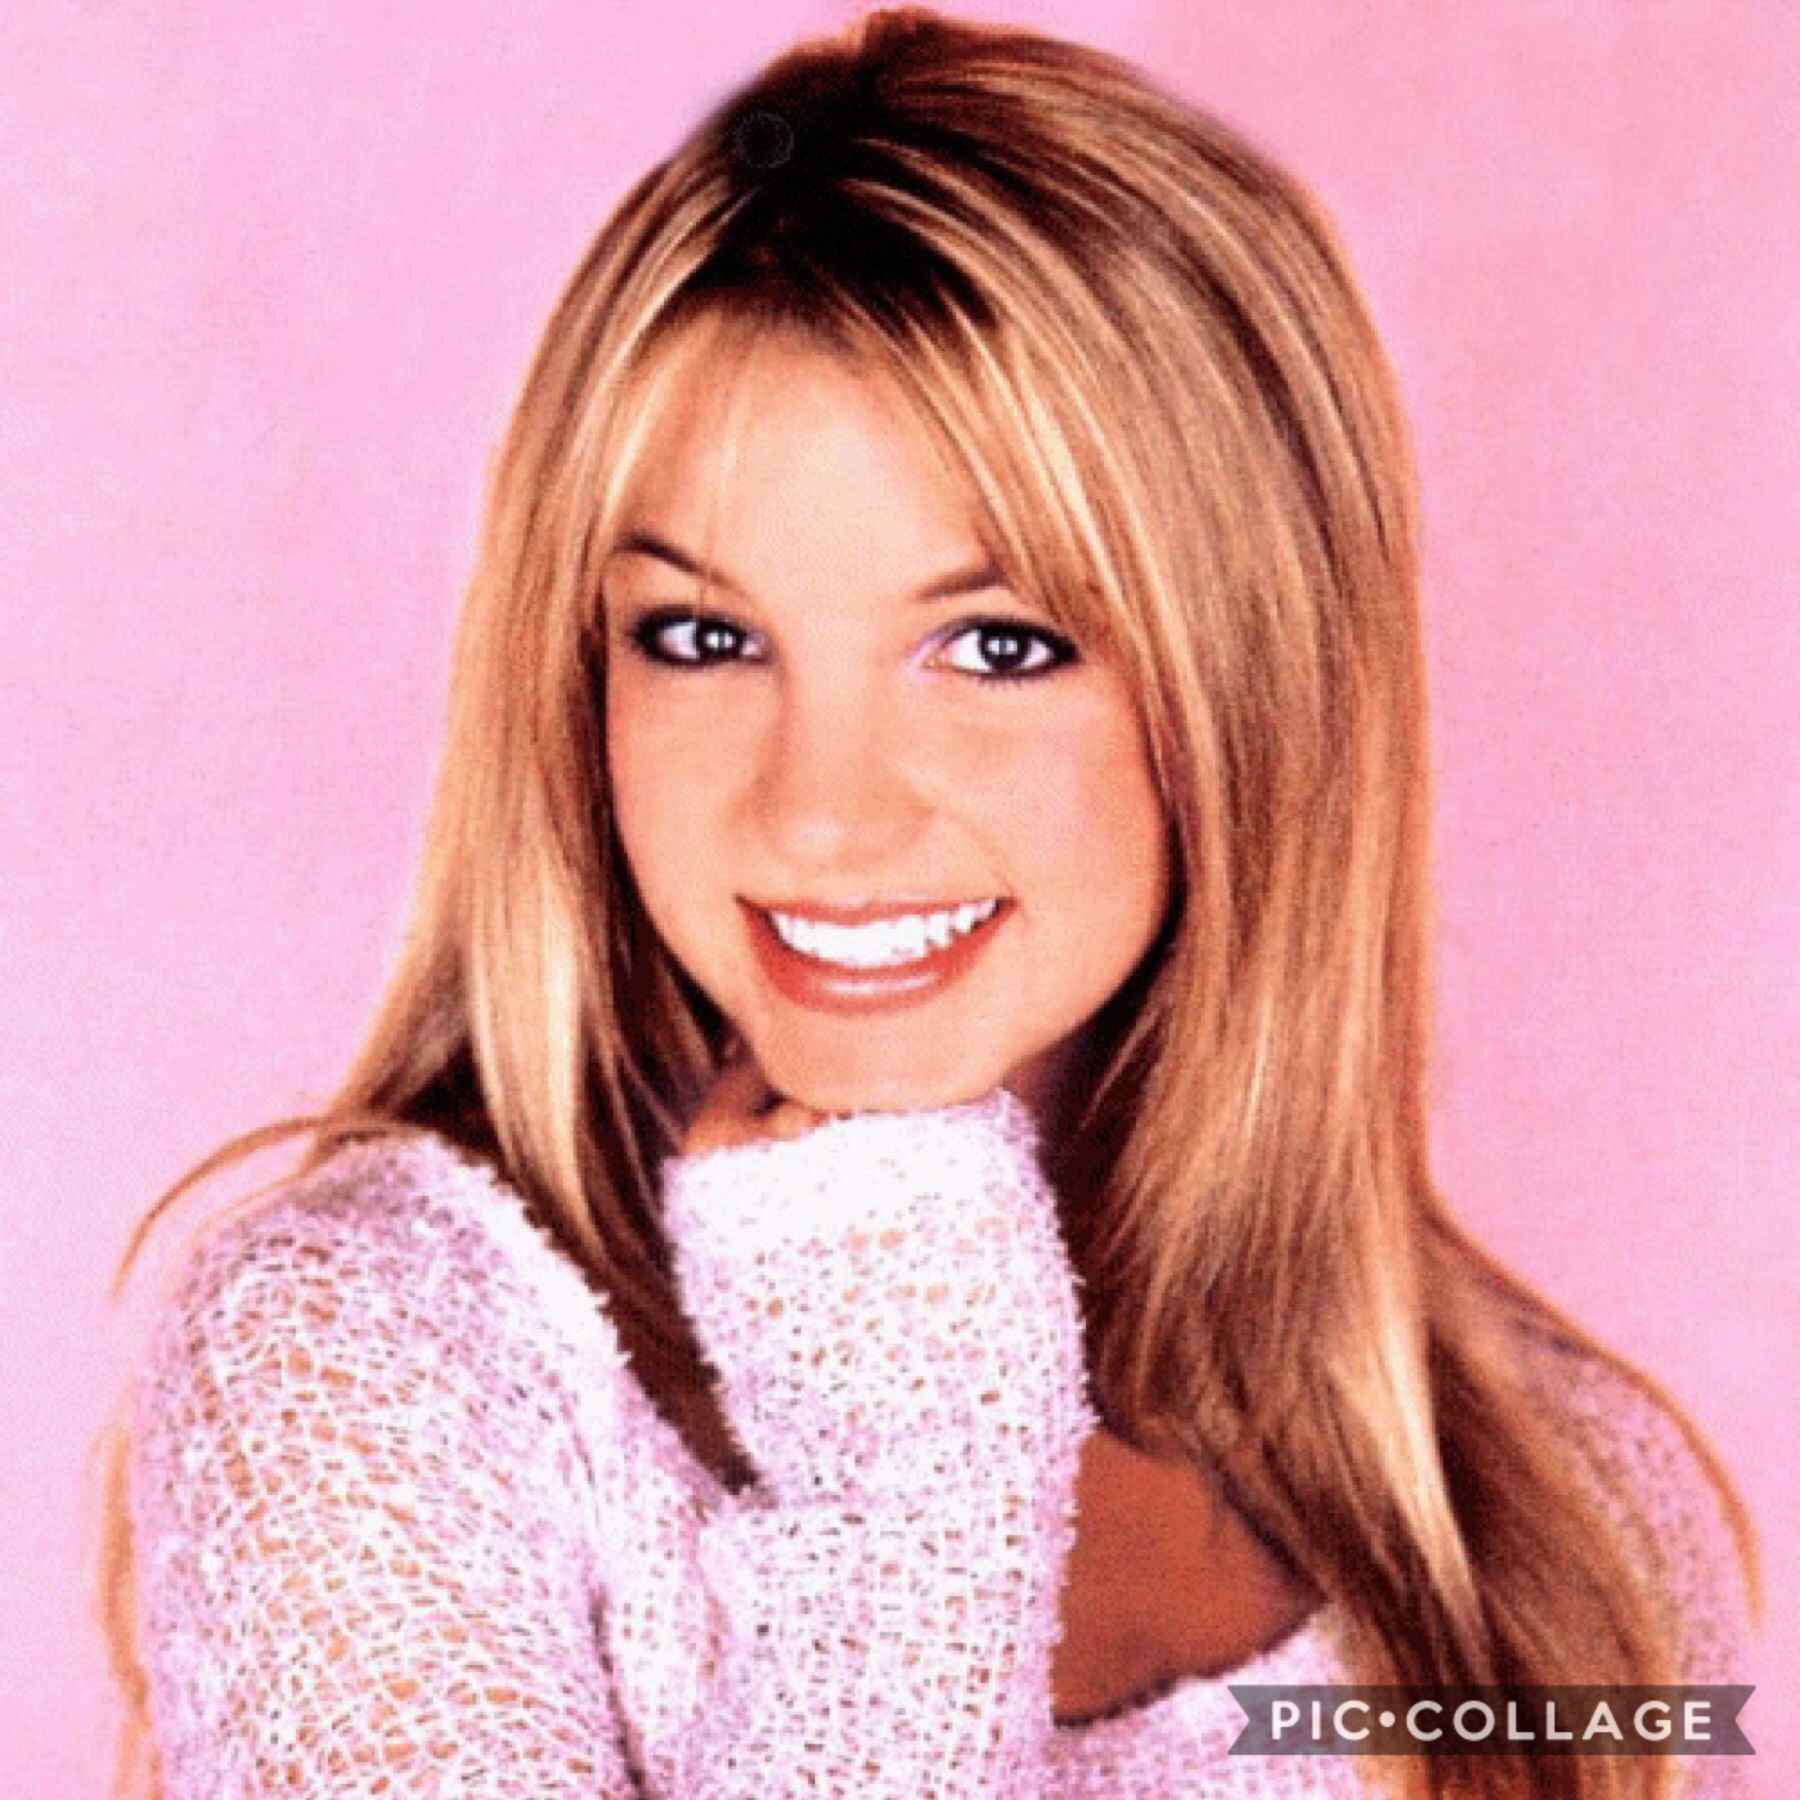 it’s the official britney spears day today! happy birthdayyyyyy to this queen💗💗🖤